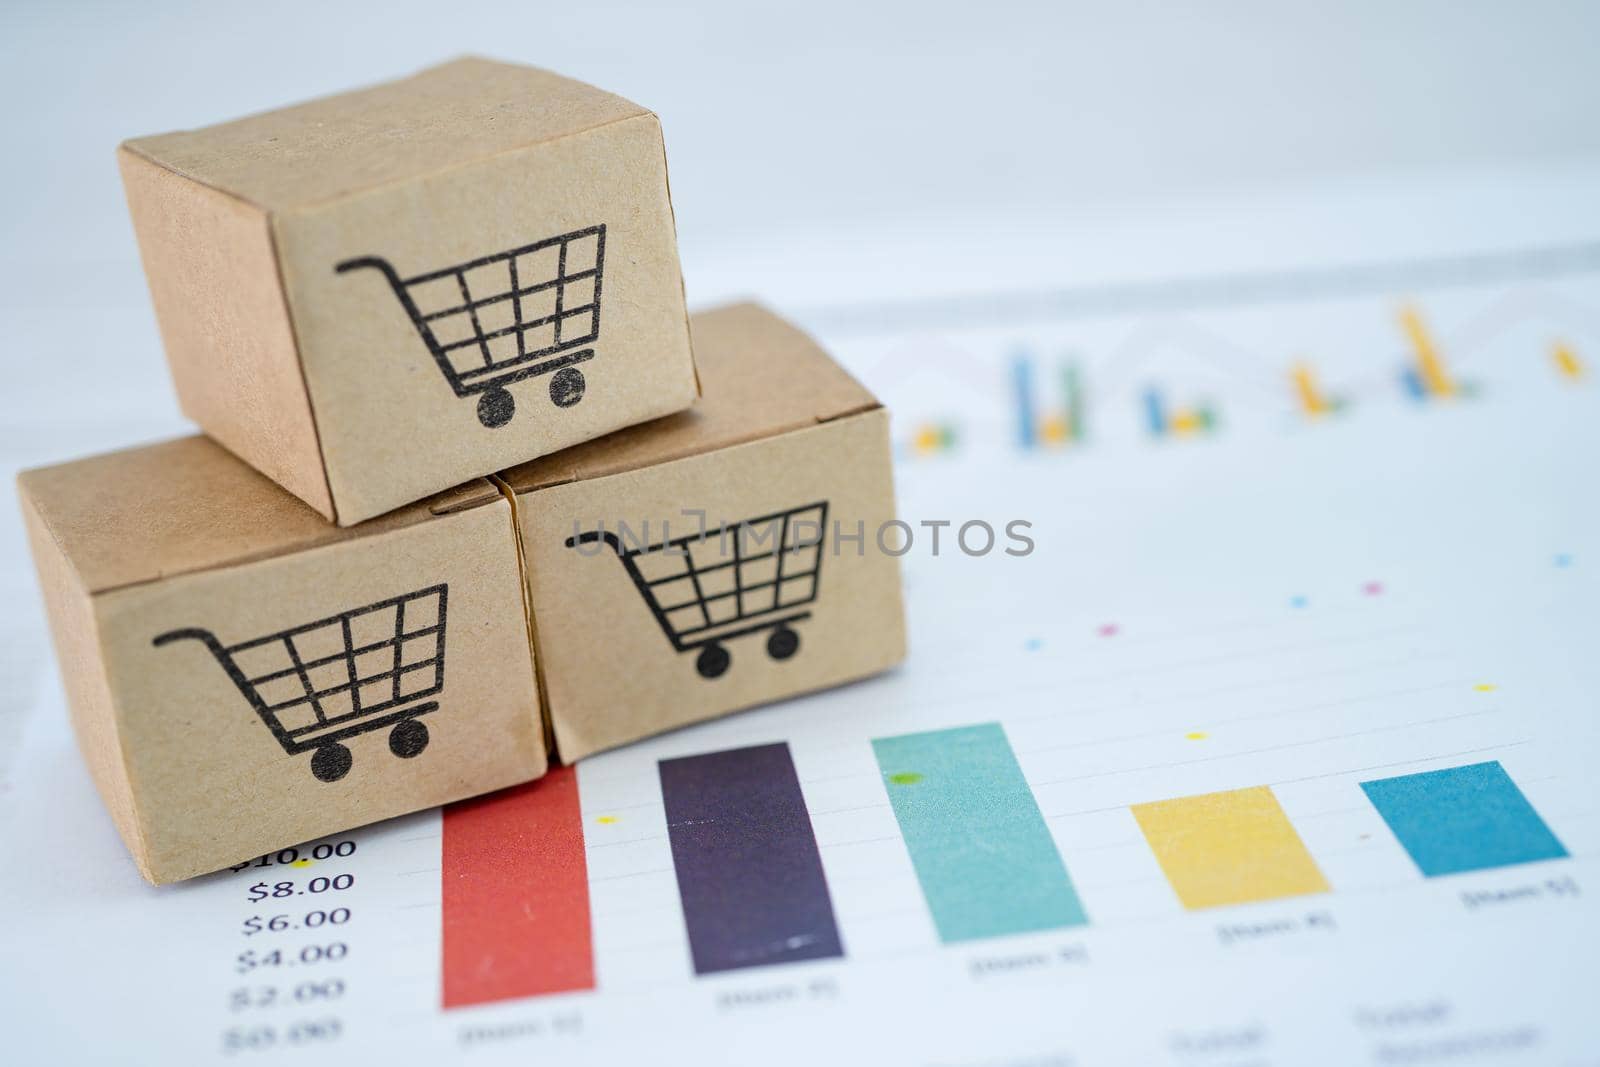 shopping cart logo on box with graph background. Banking Account, Investment Analytic research data economy, trading, Business import export transportation online company concept.